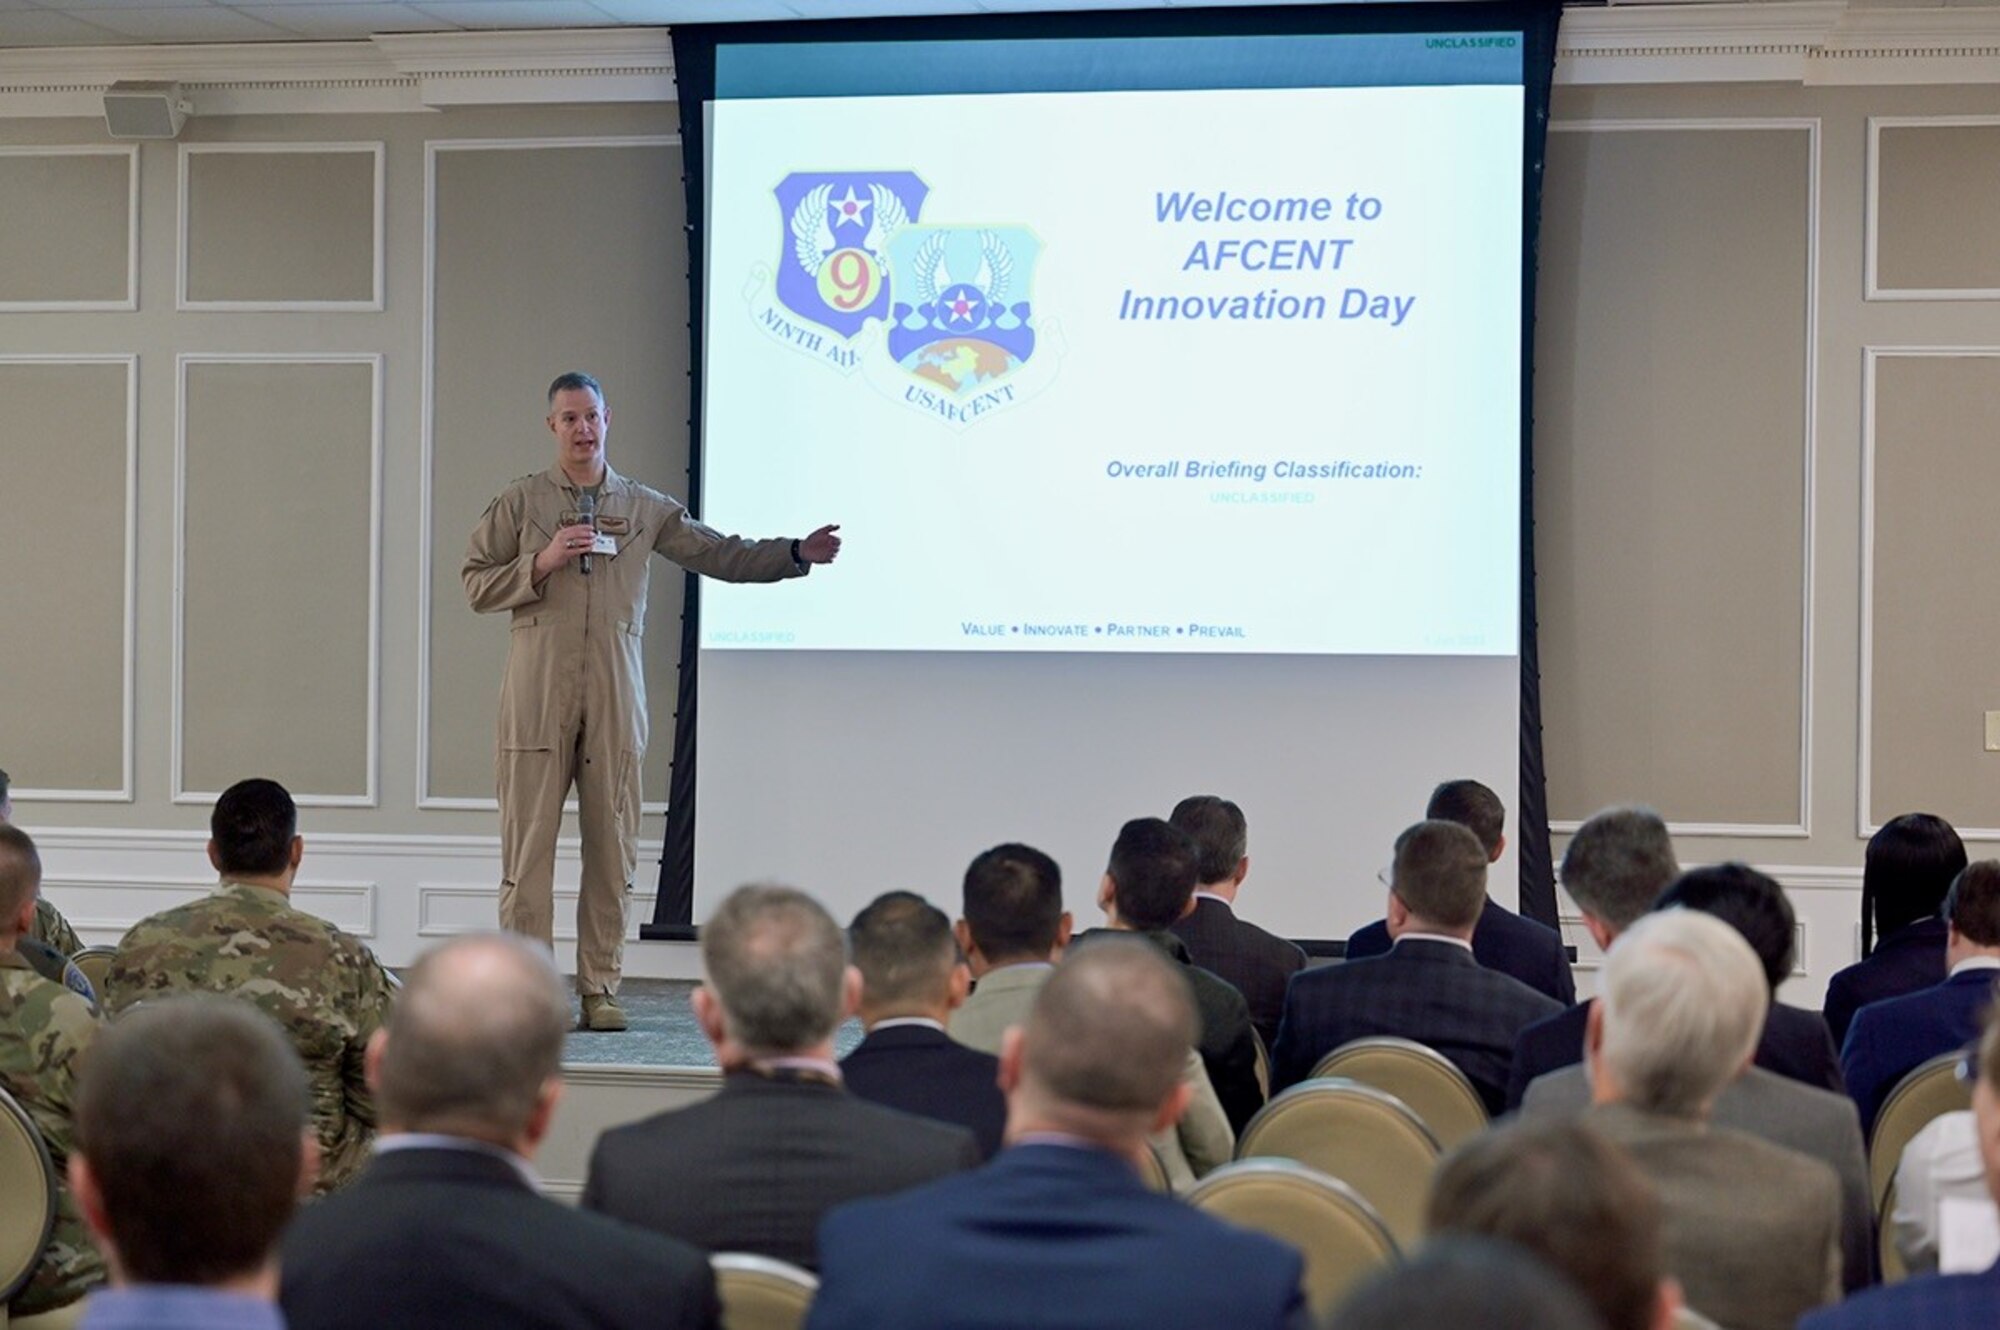 U.S. Air Force Lt. Gen. Alexus Grynkewich, Ninth Air Force (Air Forces Central) commander, offers opening remarks during Innovation Day at Shaw Air Force Base, S.C., Feb. 15, 2023. 
This was the first Innovation Day hosted by 9 AF (AFCENT).  More than 70 industry partners and 230 participants attended the event designed to connect the organization with solutions to problem sets in their 21-country area of responsibility.